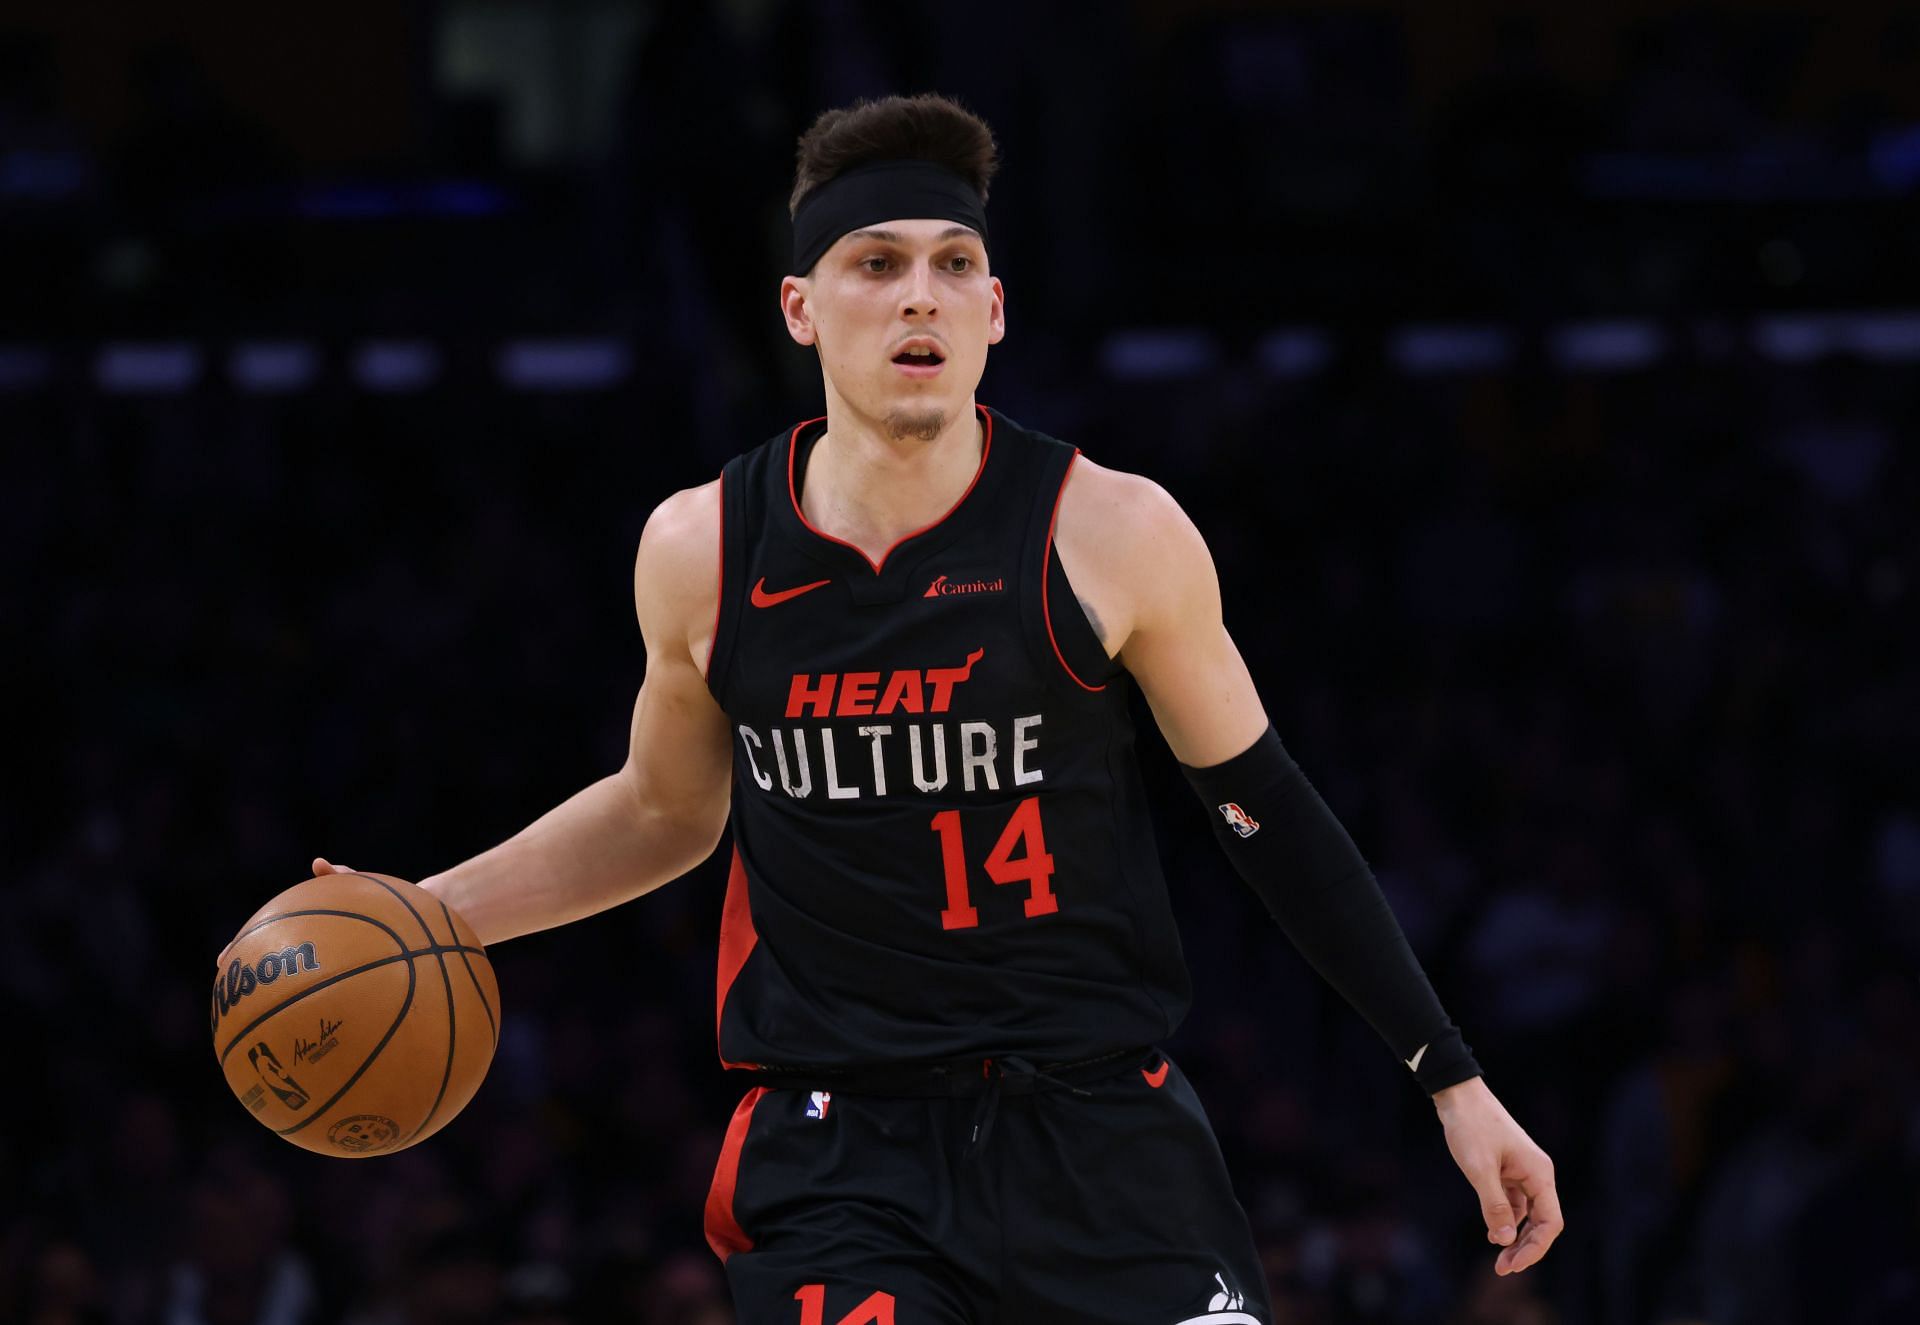 Tyler Herro is likely at the center of any packages the Heat put together